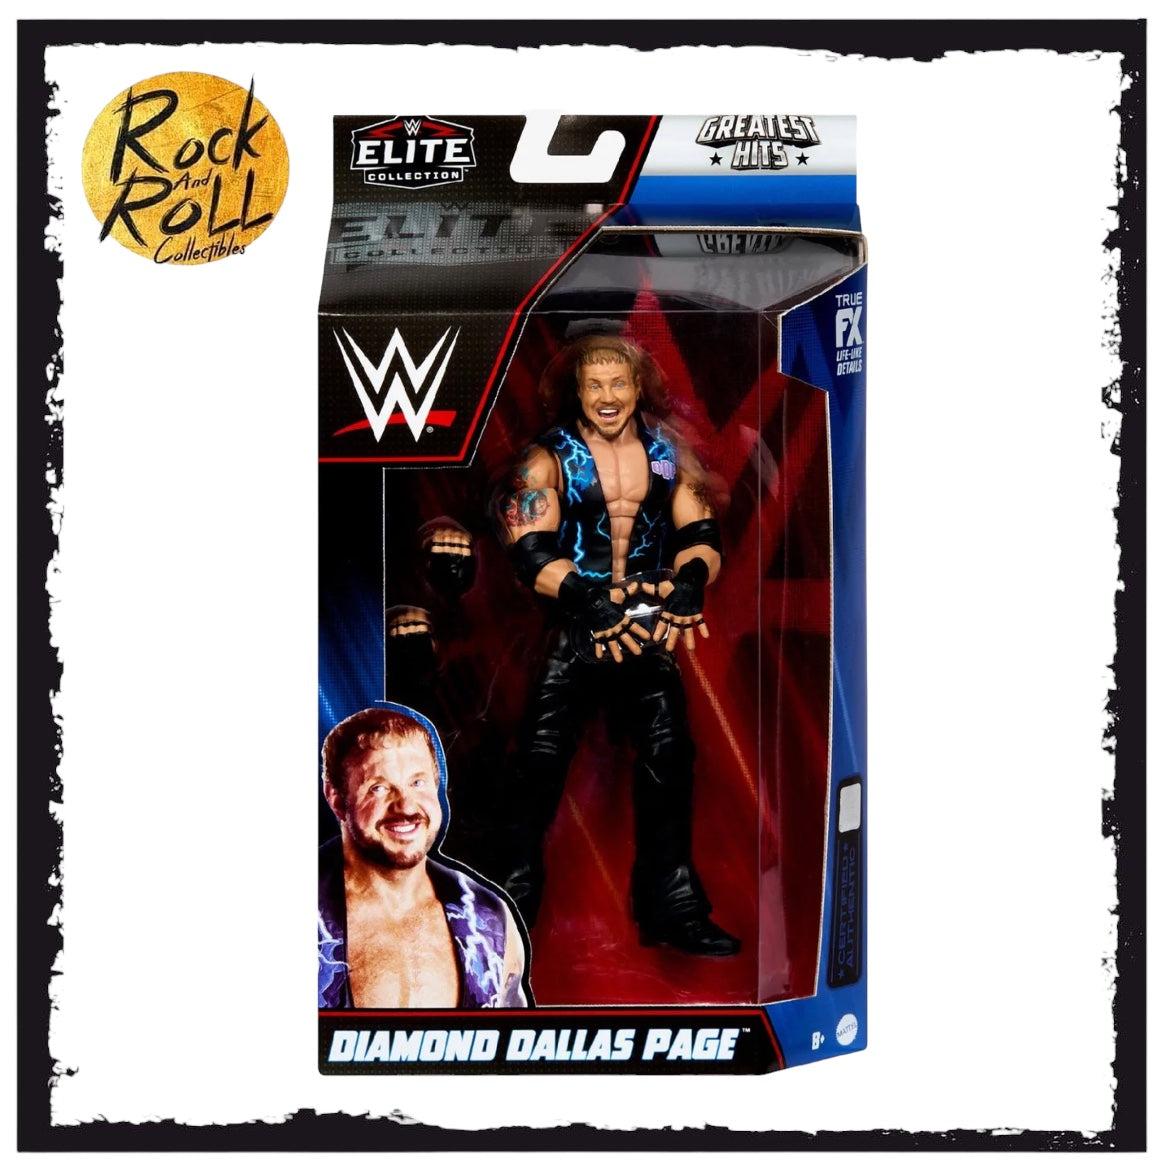 (Special Offer) DDP- Diamond Dallas Page Greatest Hits Series 2 US Import